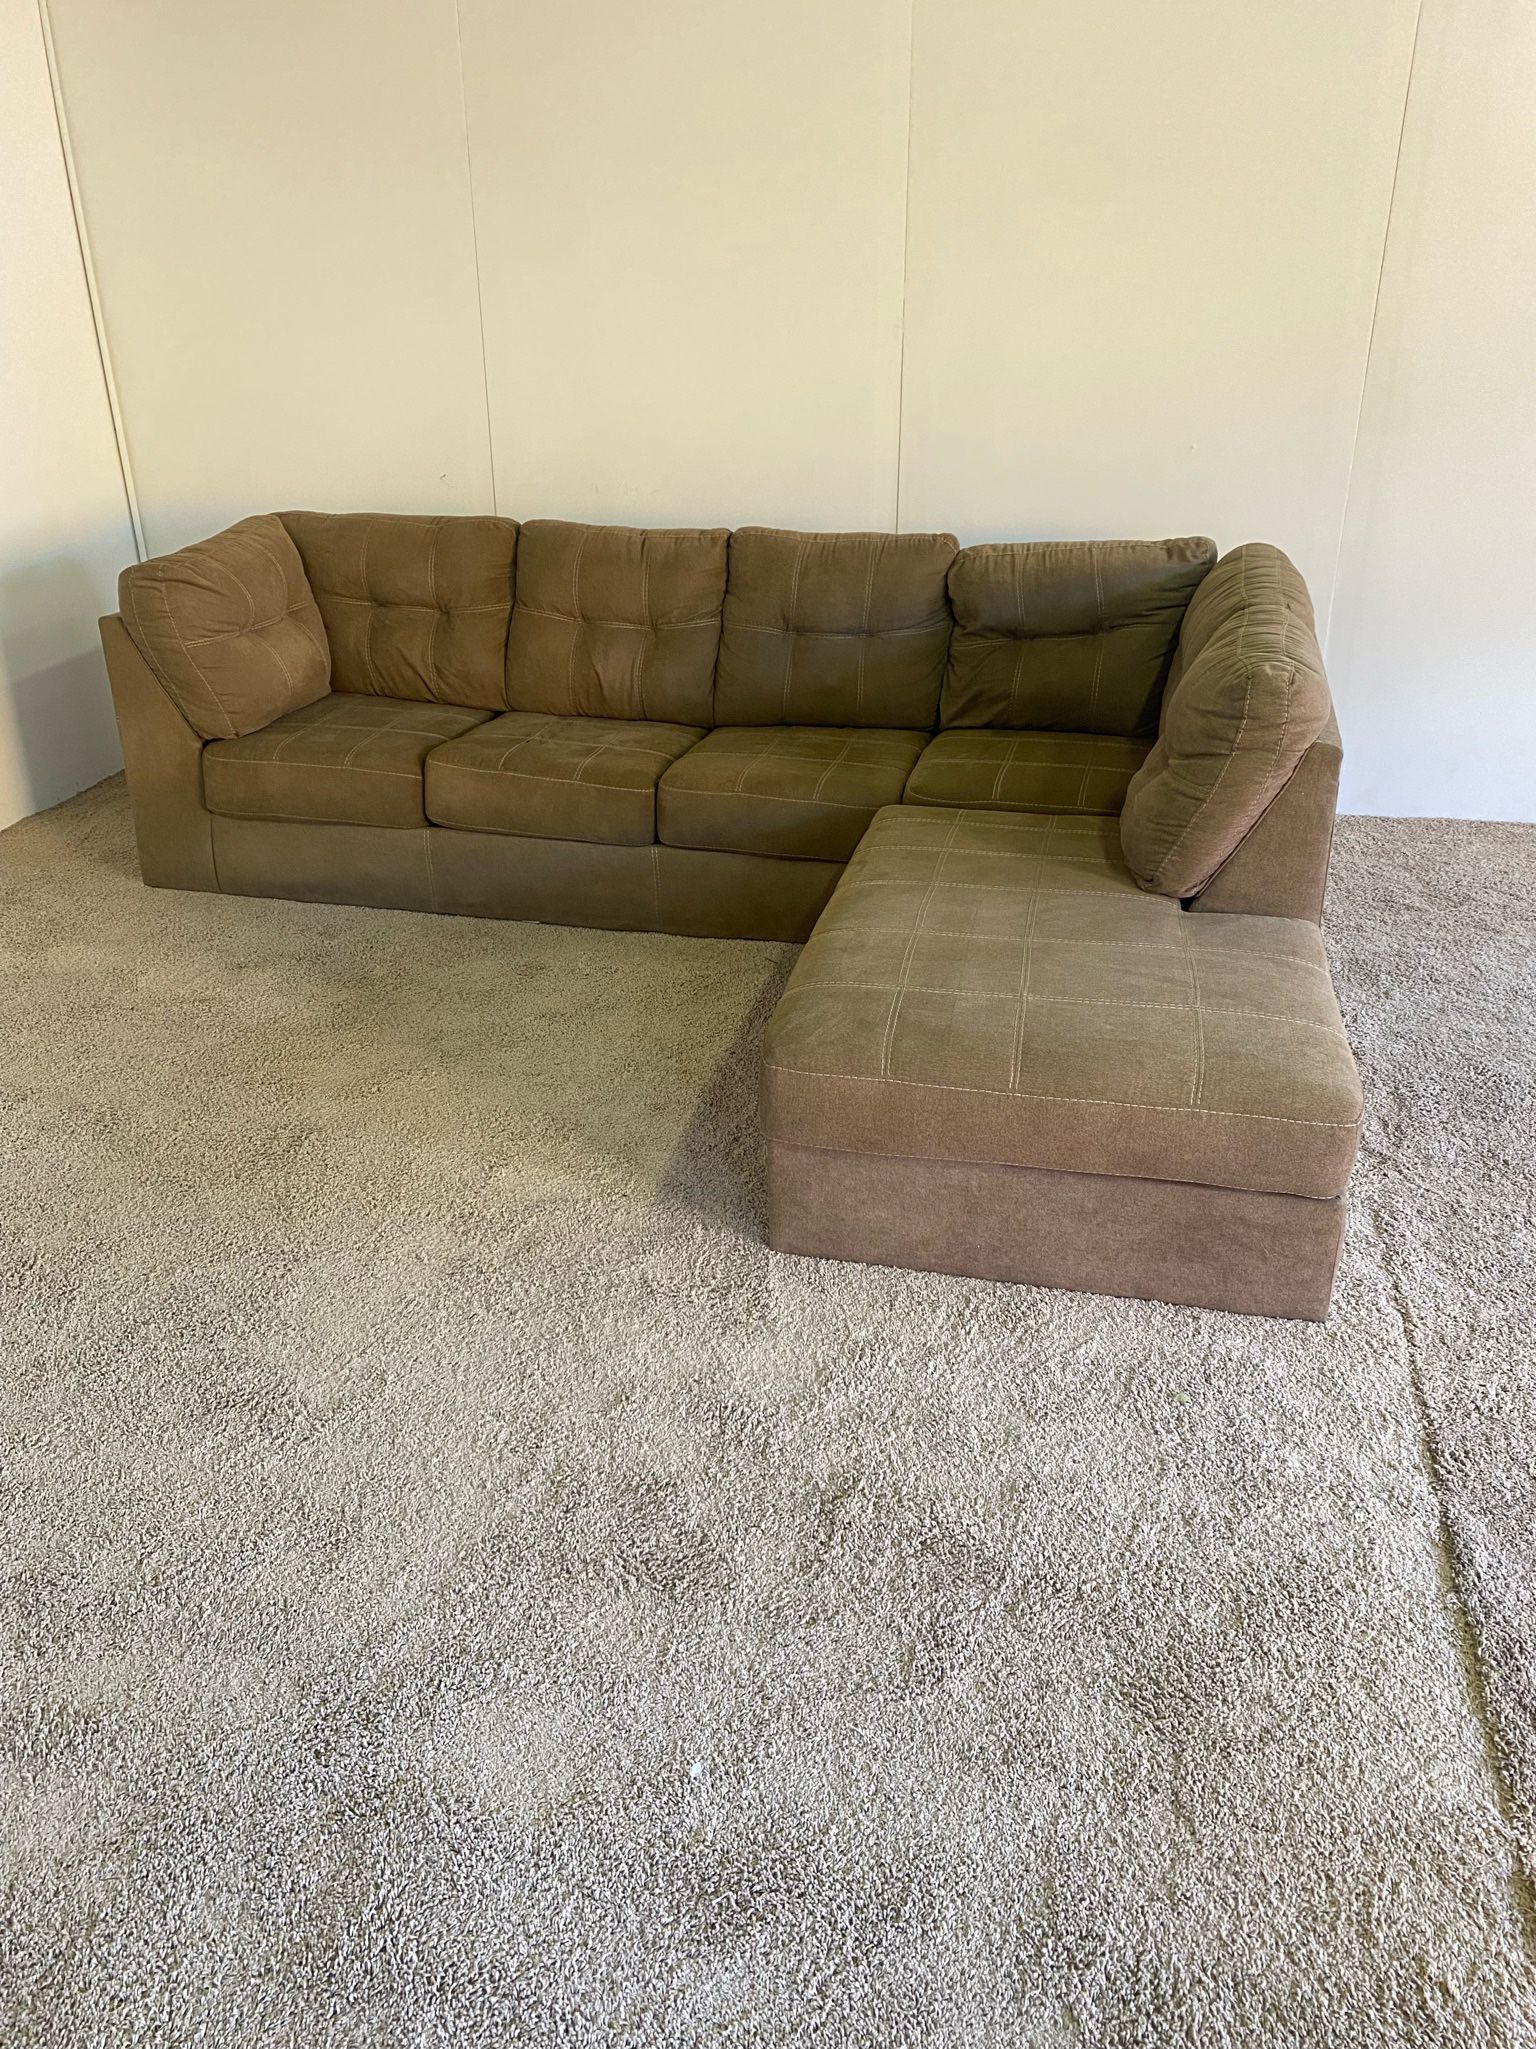 L-Shape Sectional Couch *Free Delivery*